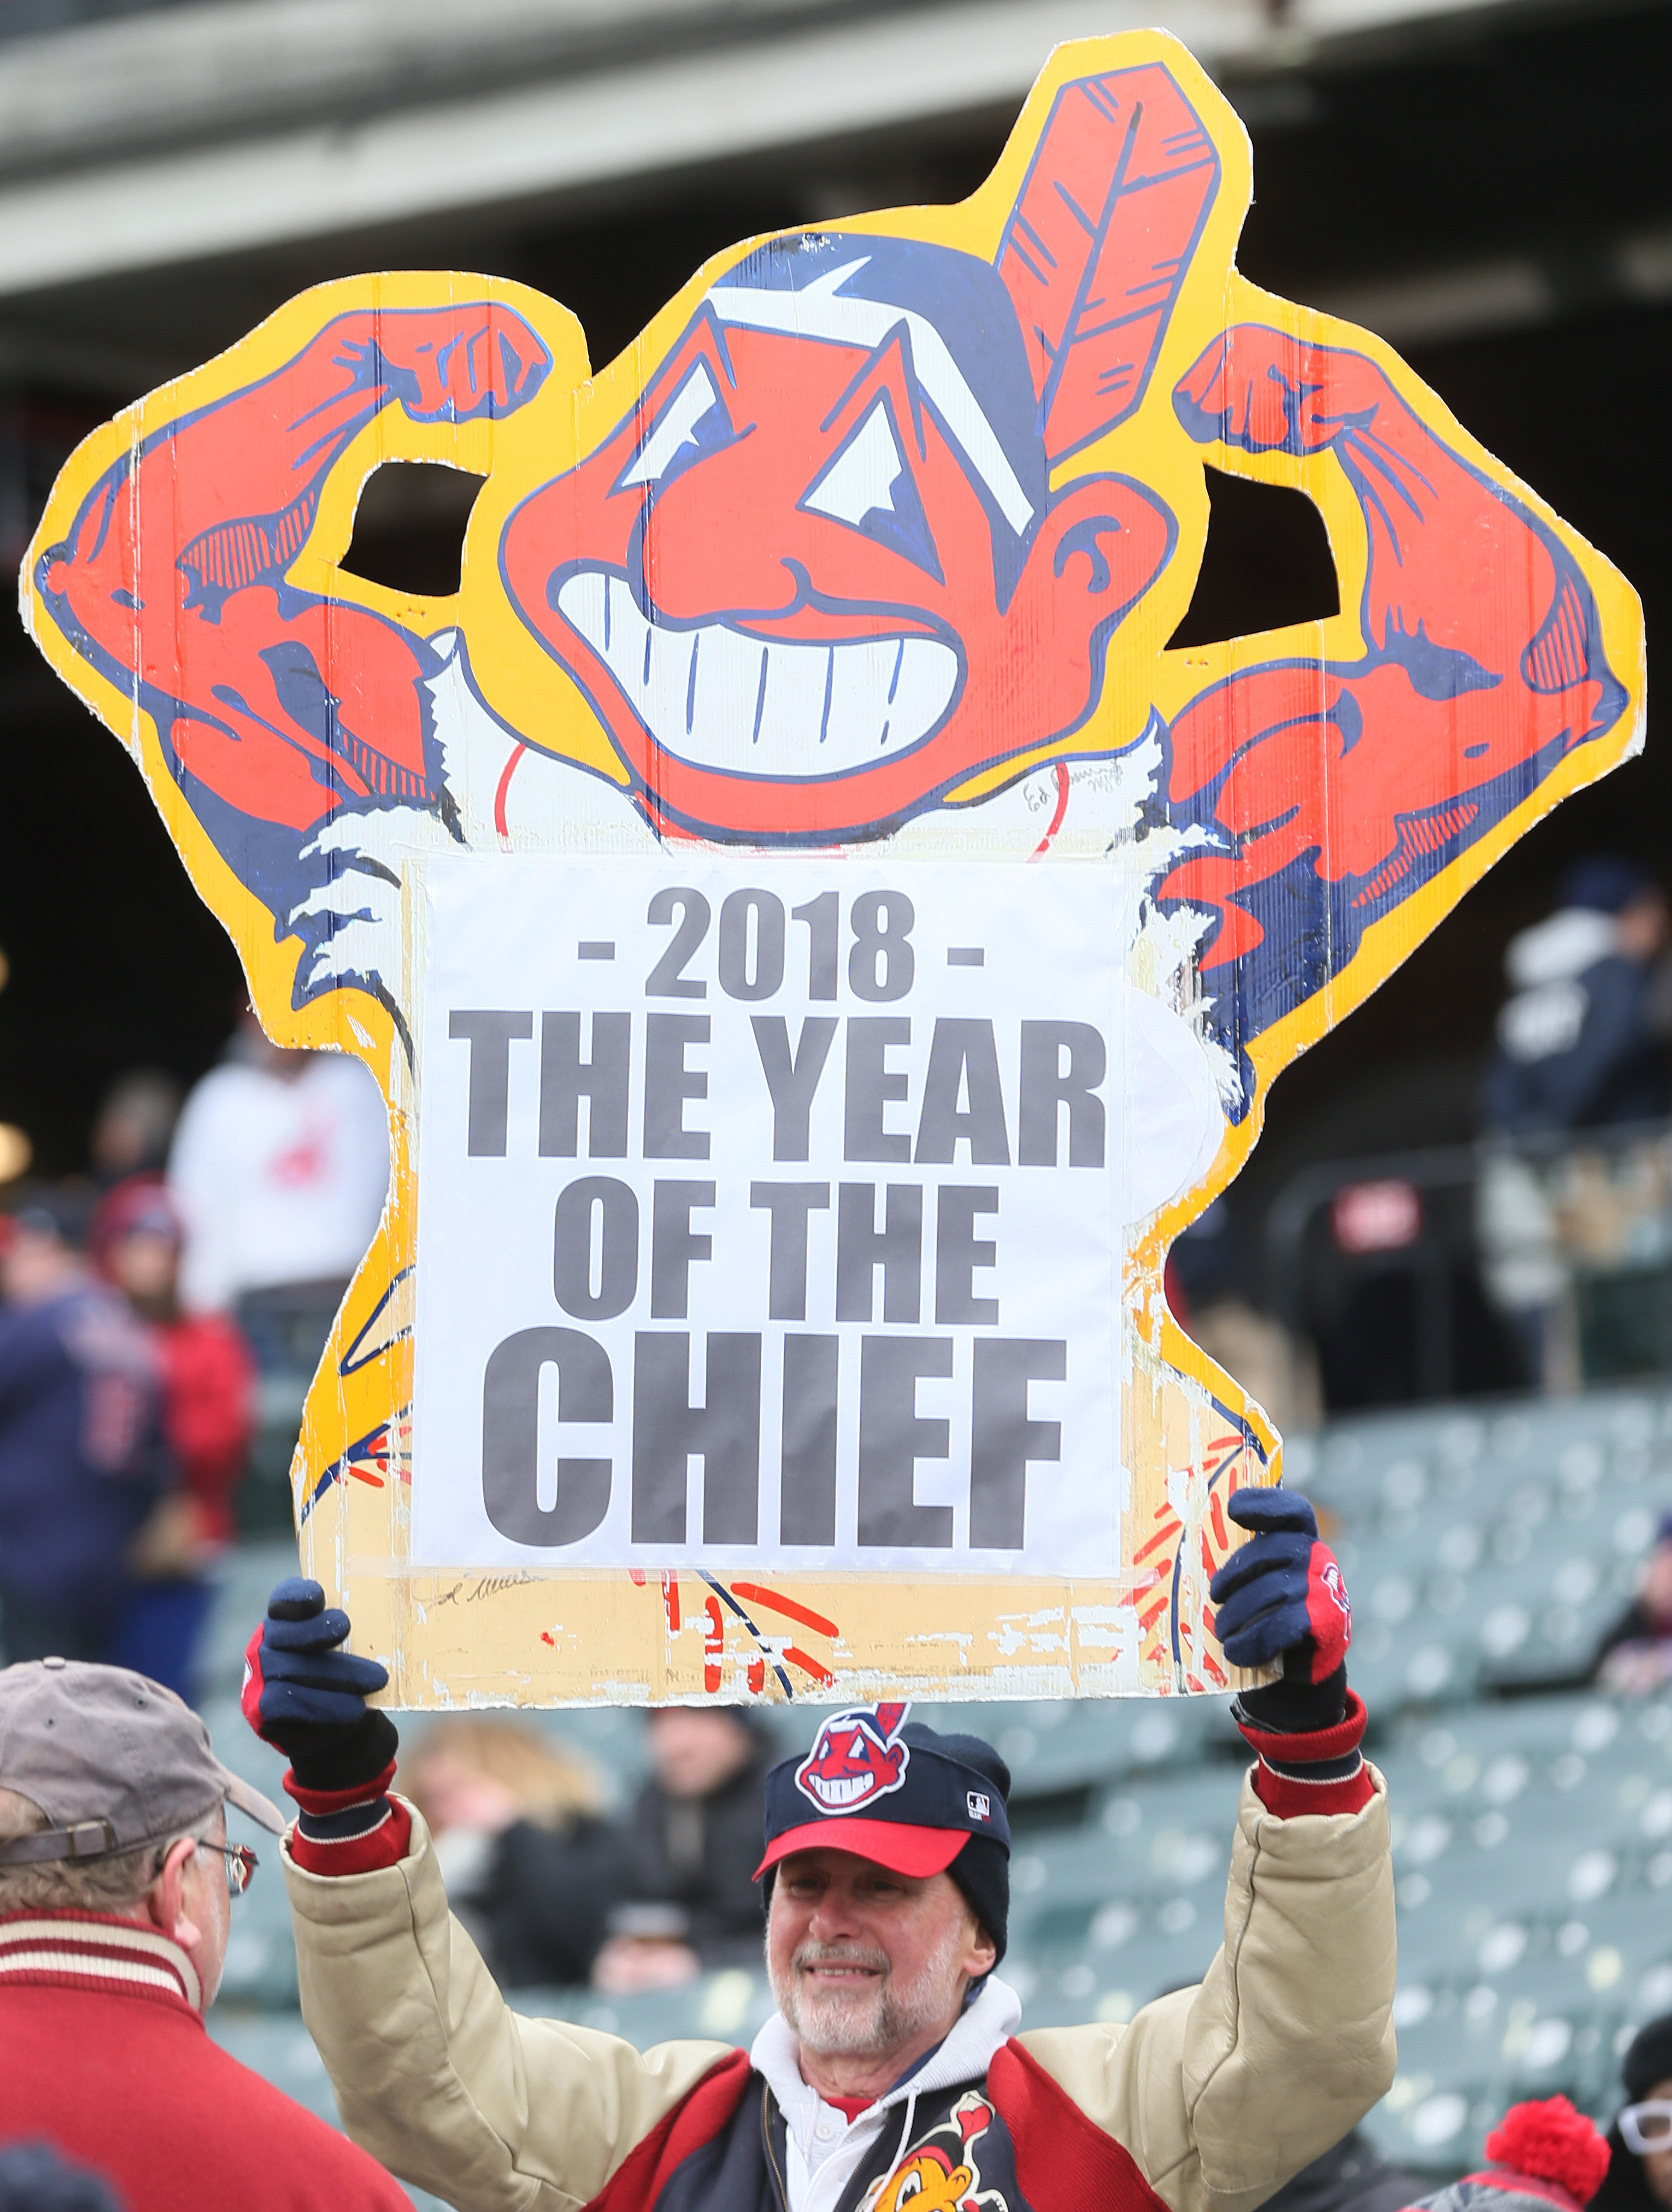 Cleveland Indians' Chief Wahoo, from inception to end: A timeline 